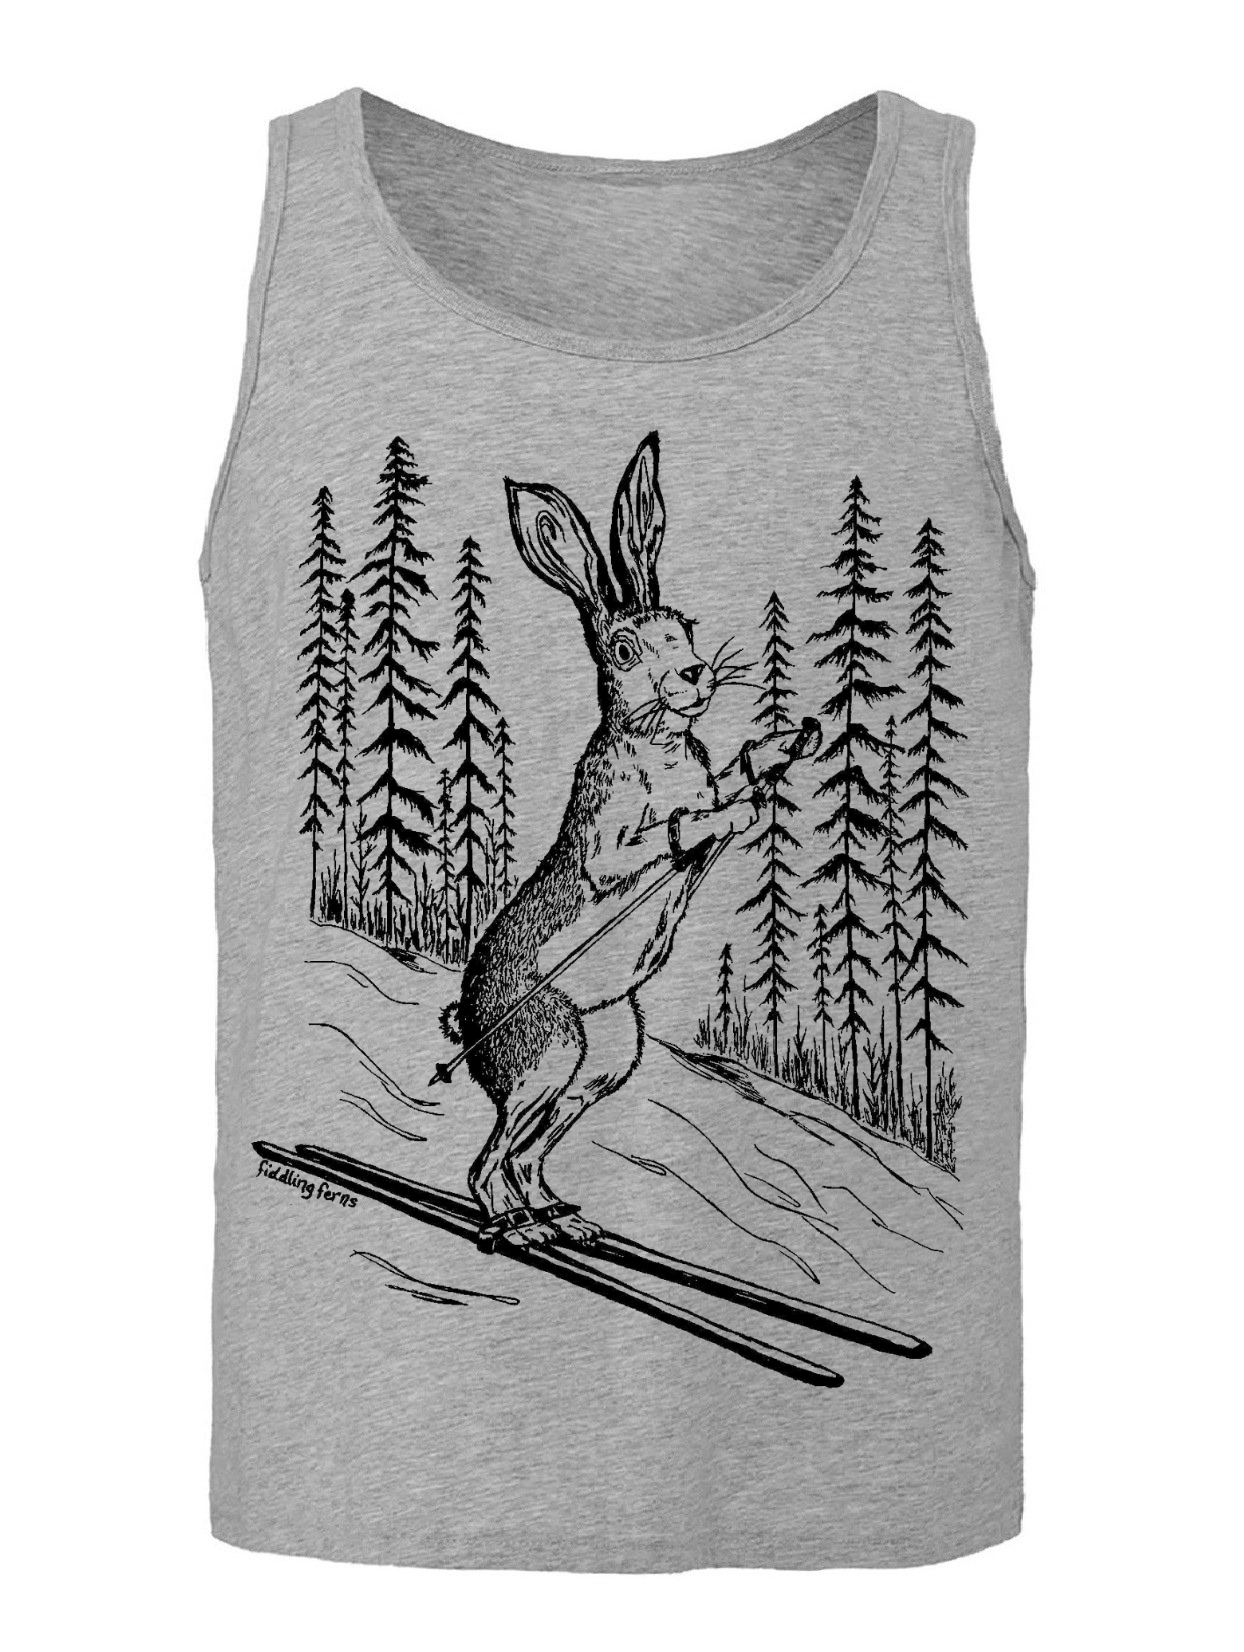 The Bunny Hill Unisex Tank Top